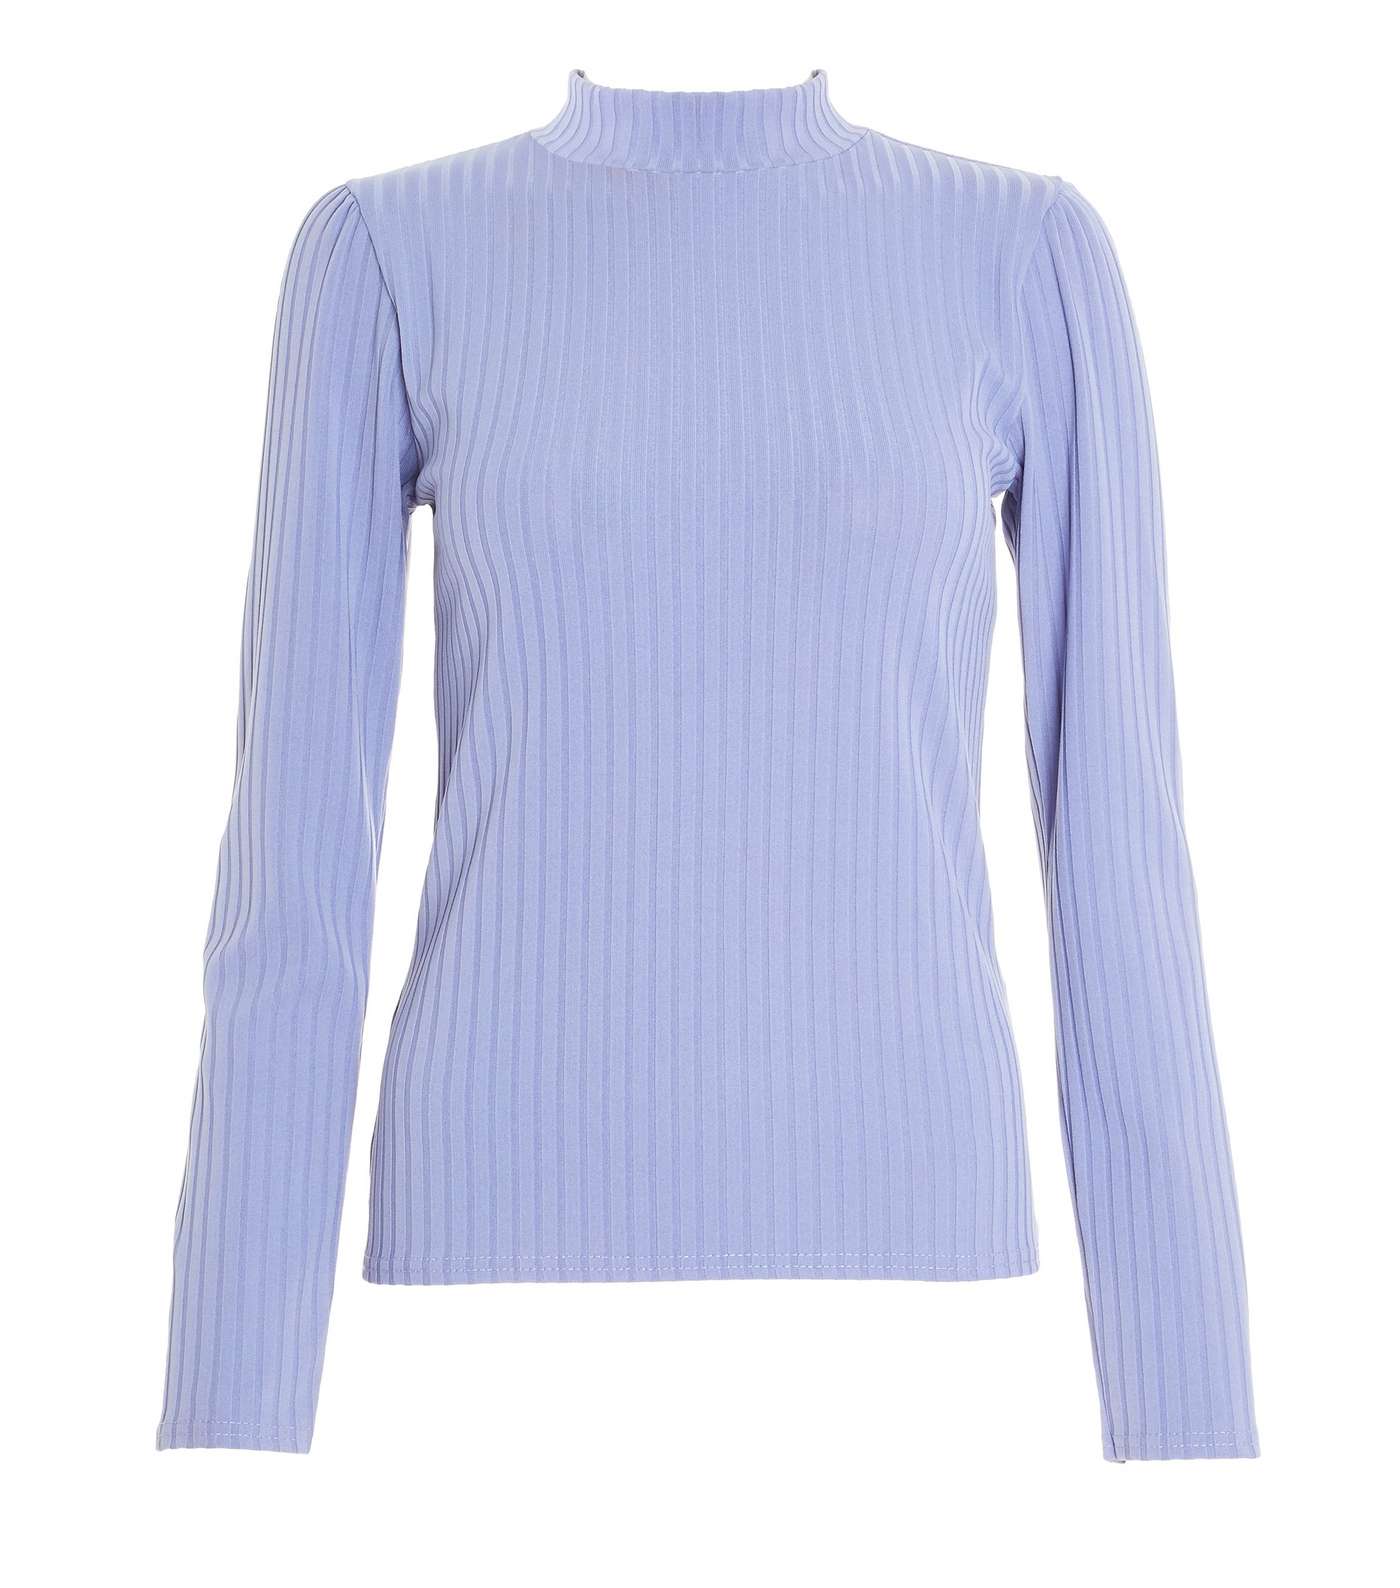 QUIZ Bright Blue Ribbed High Neck Top Image 4